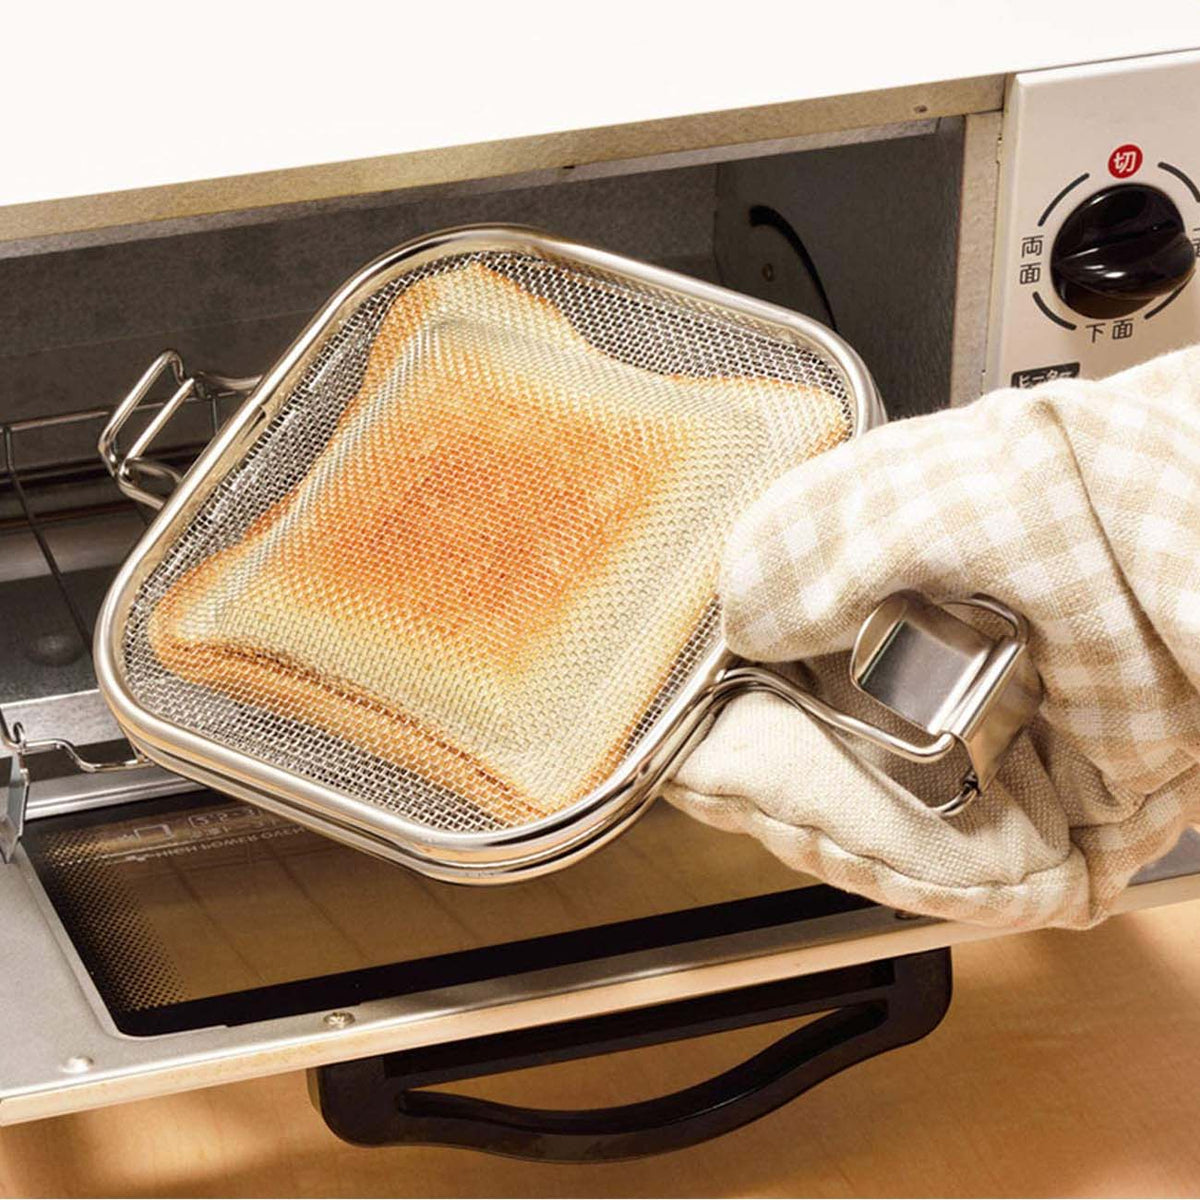 AUX Leye Stainless Steel Grilled Sandwich Maker